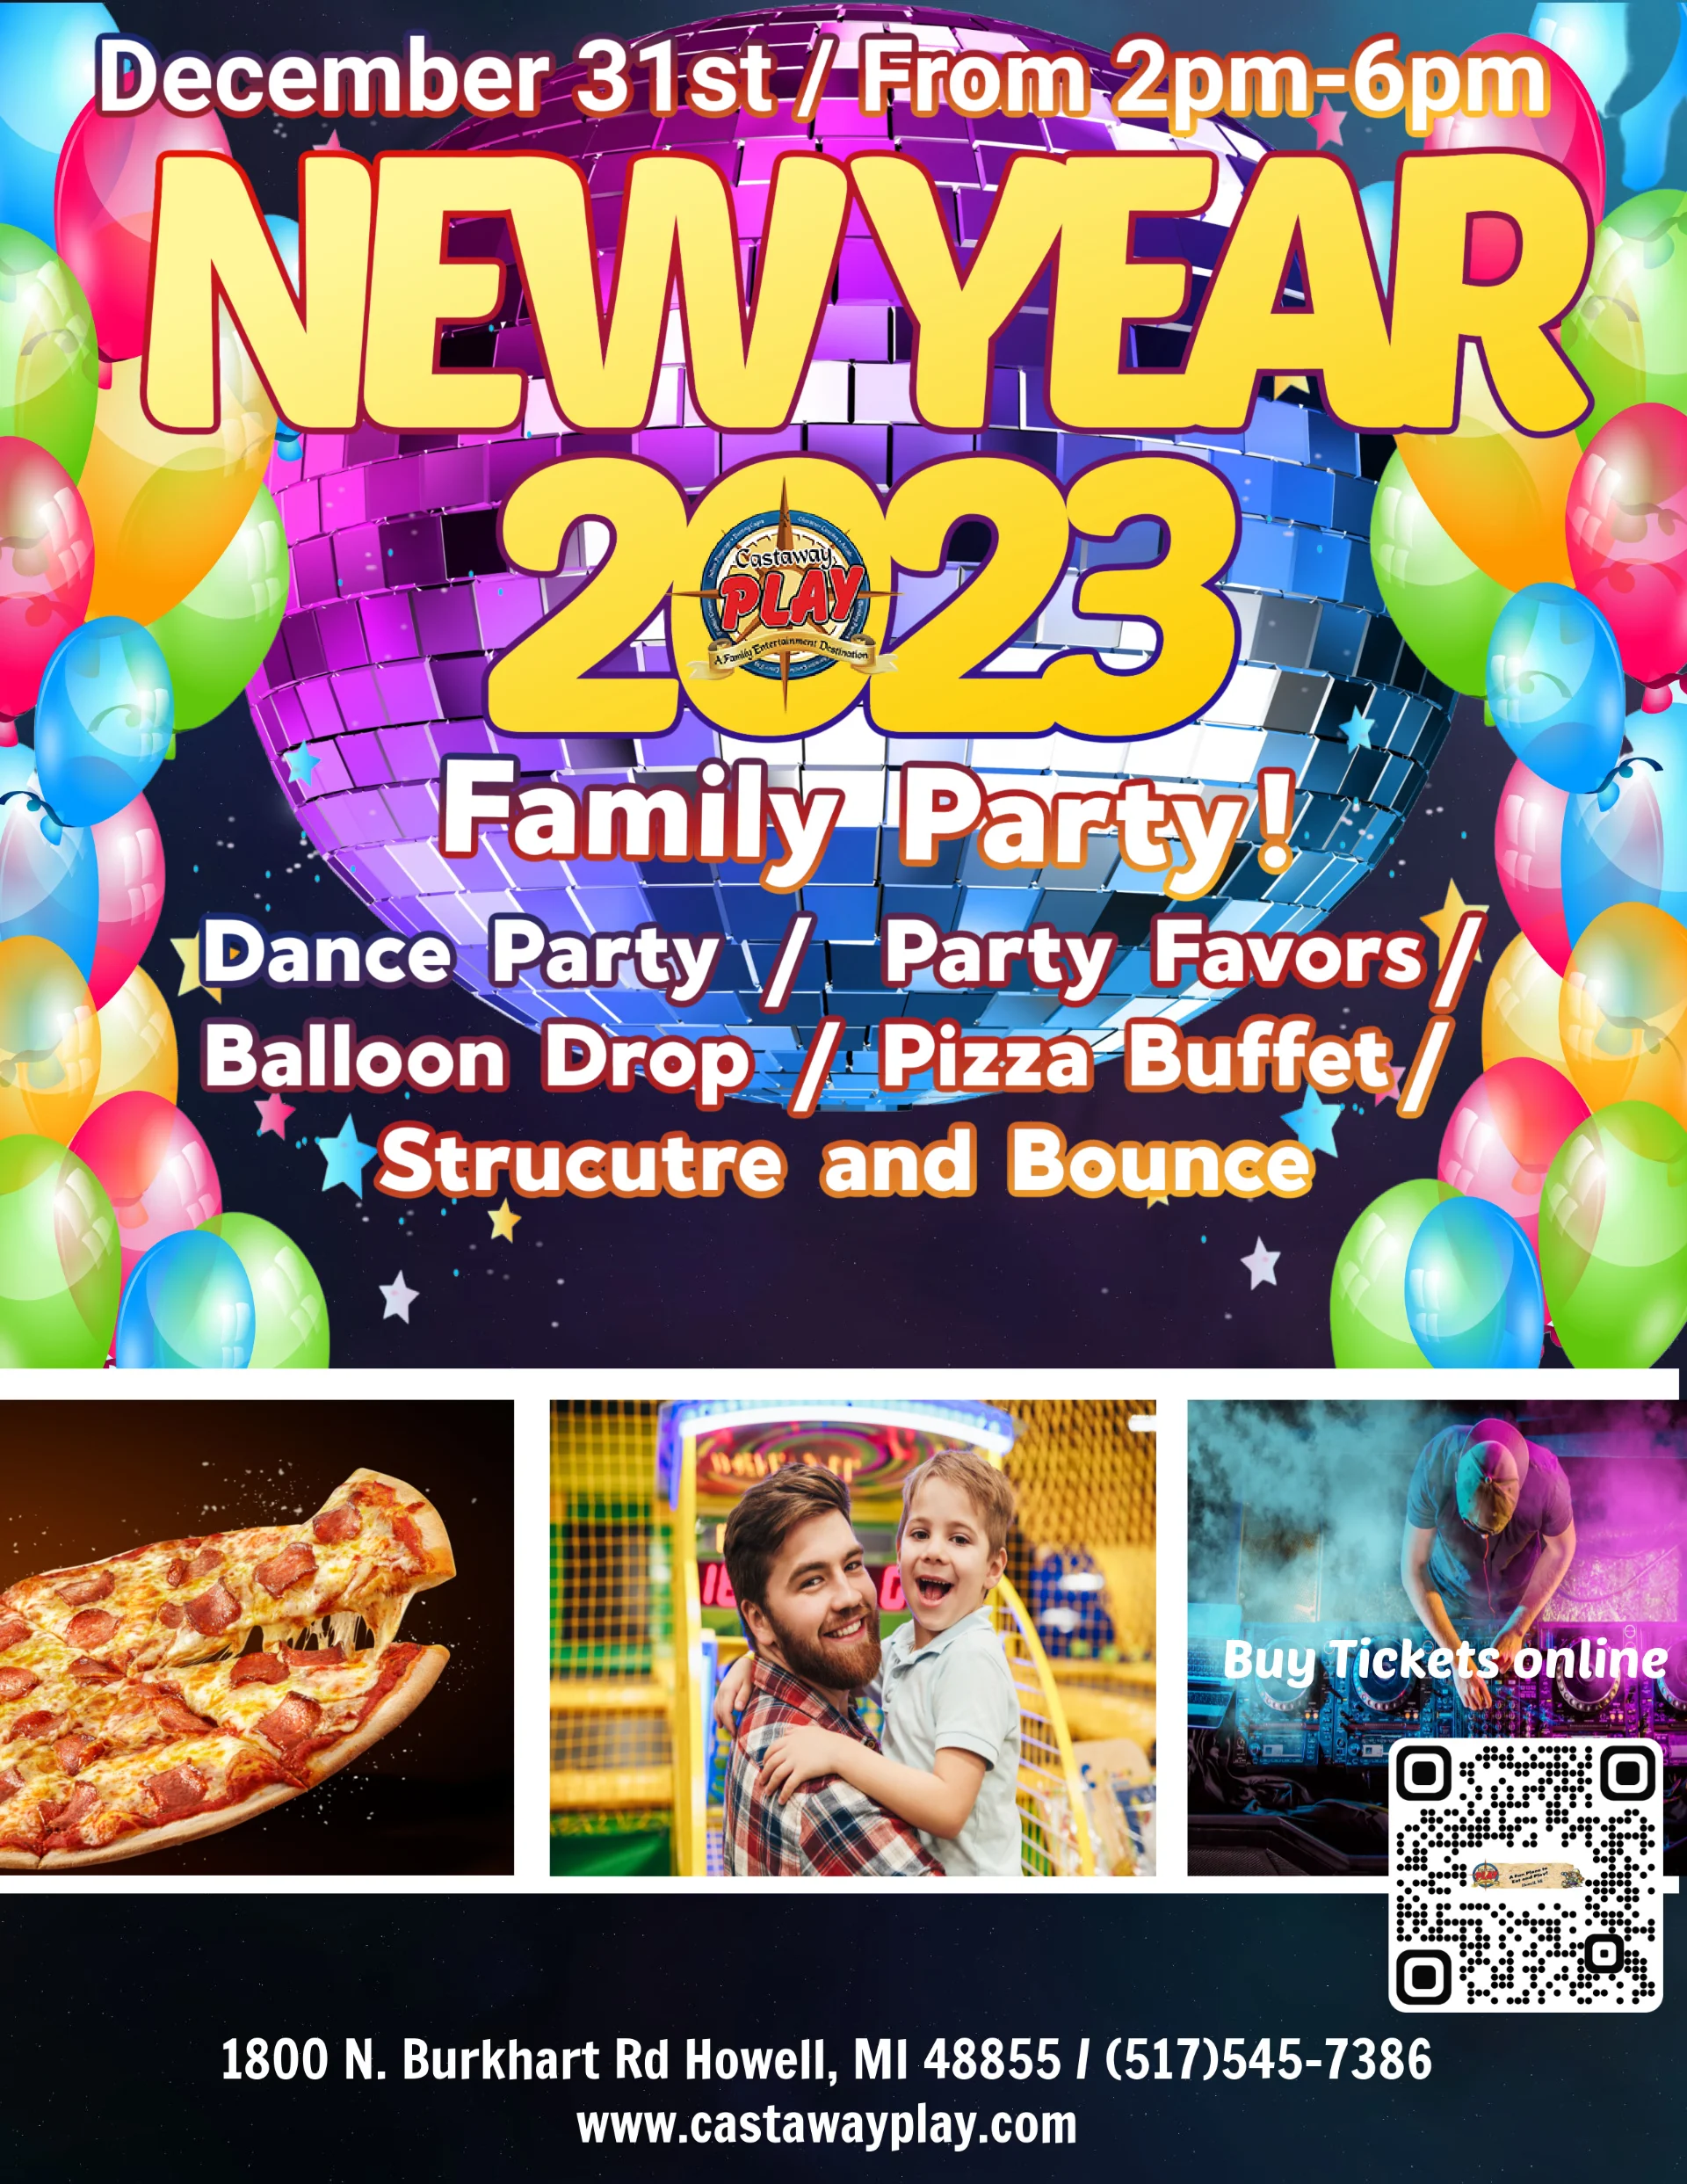 Castaway Play New Year's Eve Party